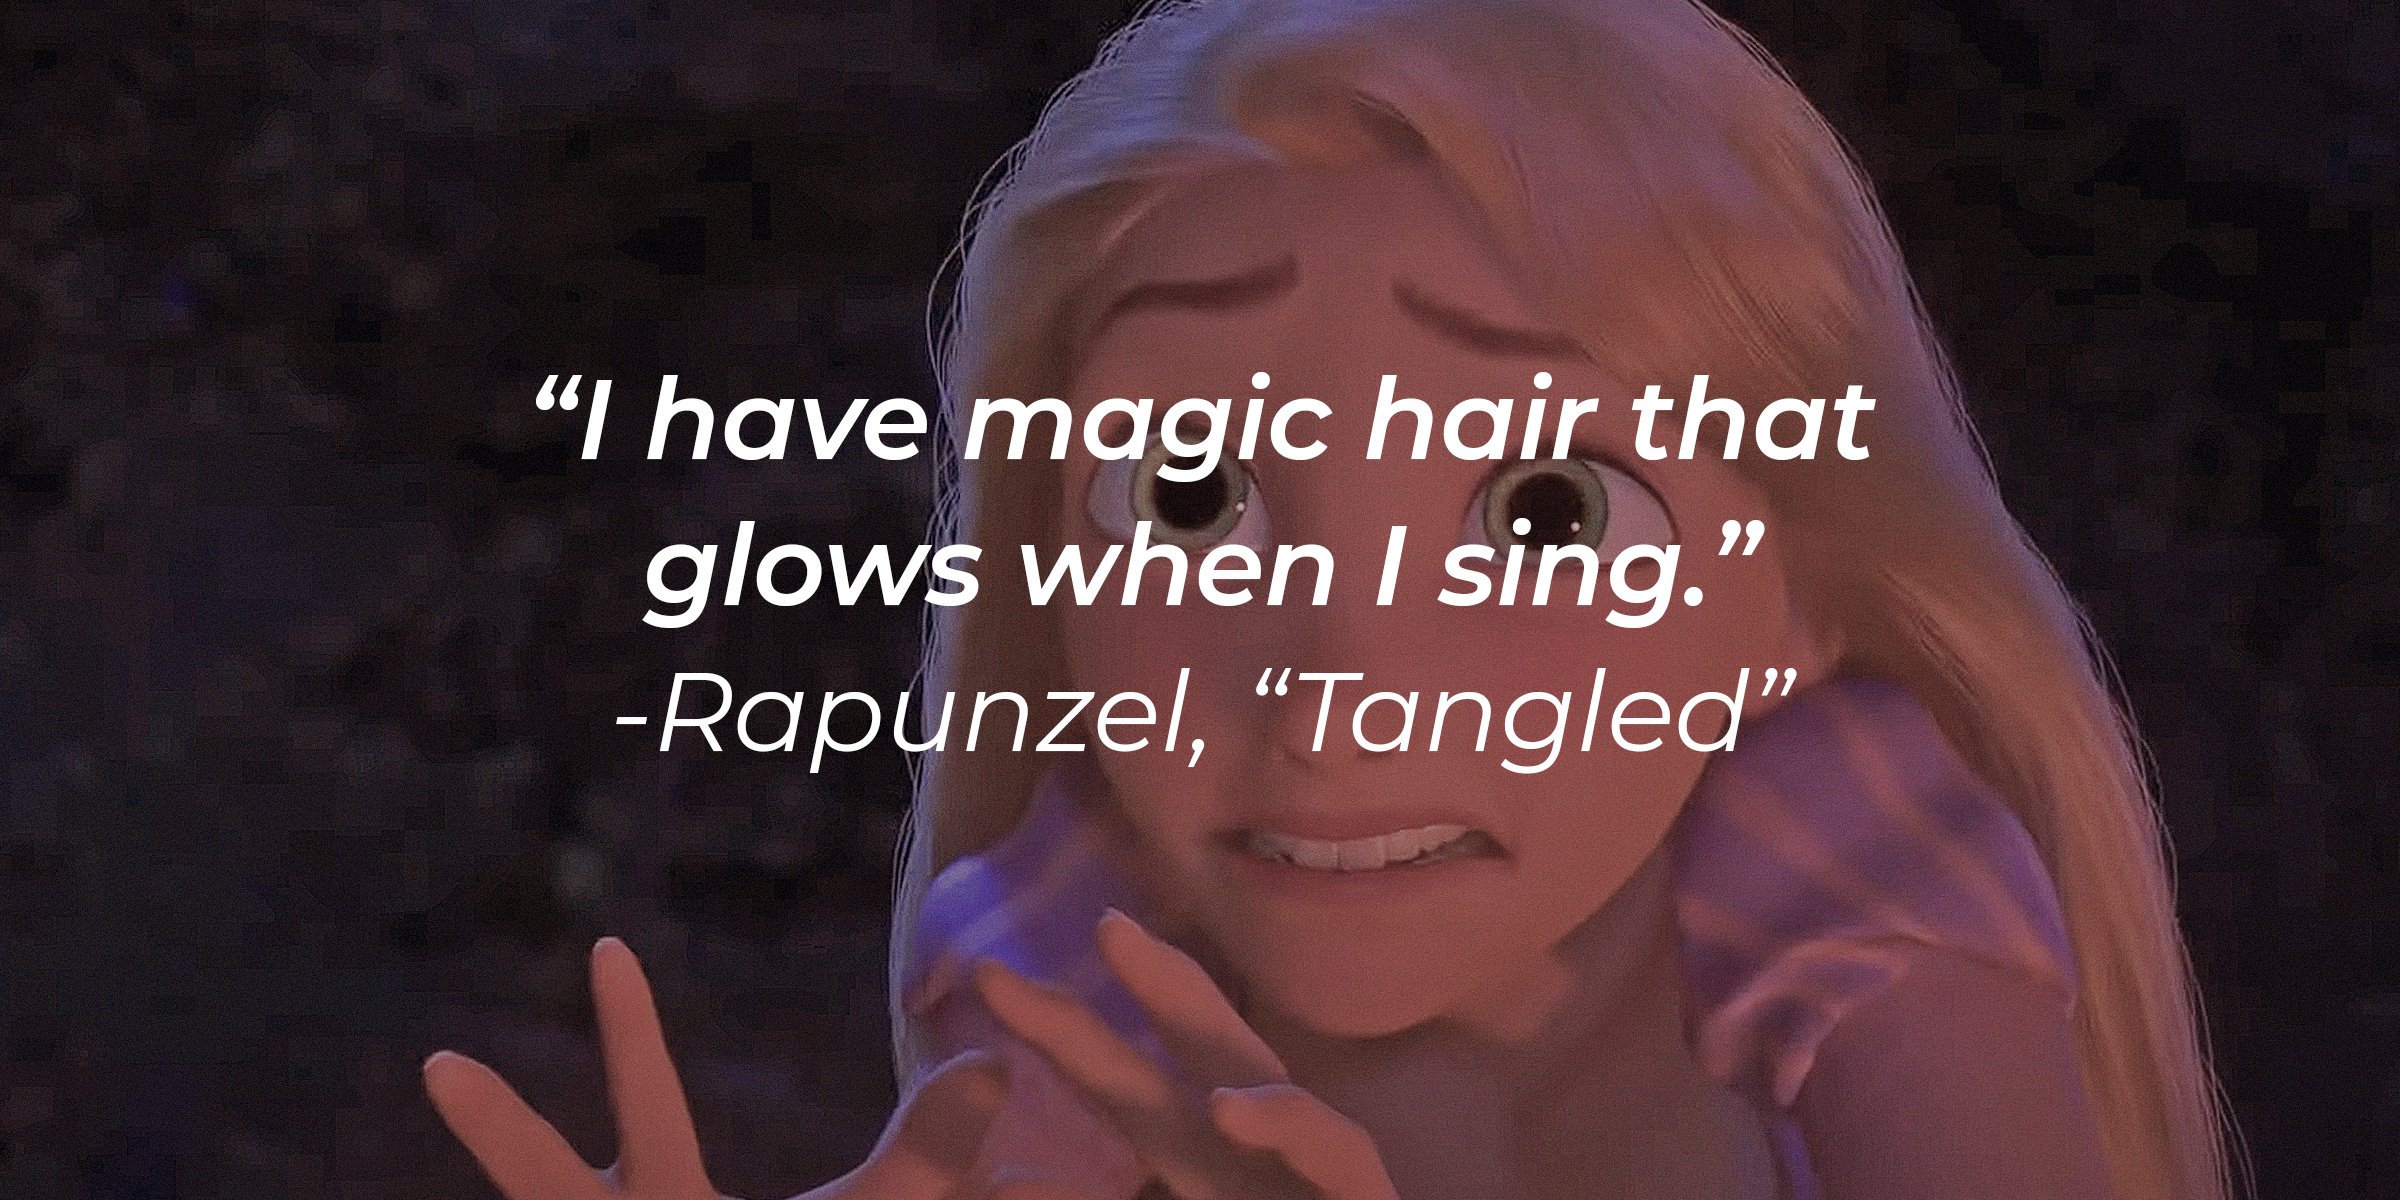 Source: Youtube.com/Disney Latinoamérica | Rapunzel with the quote: "I have magic hair that glows when I sing."